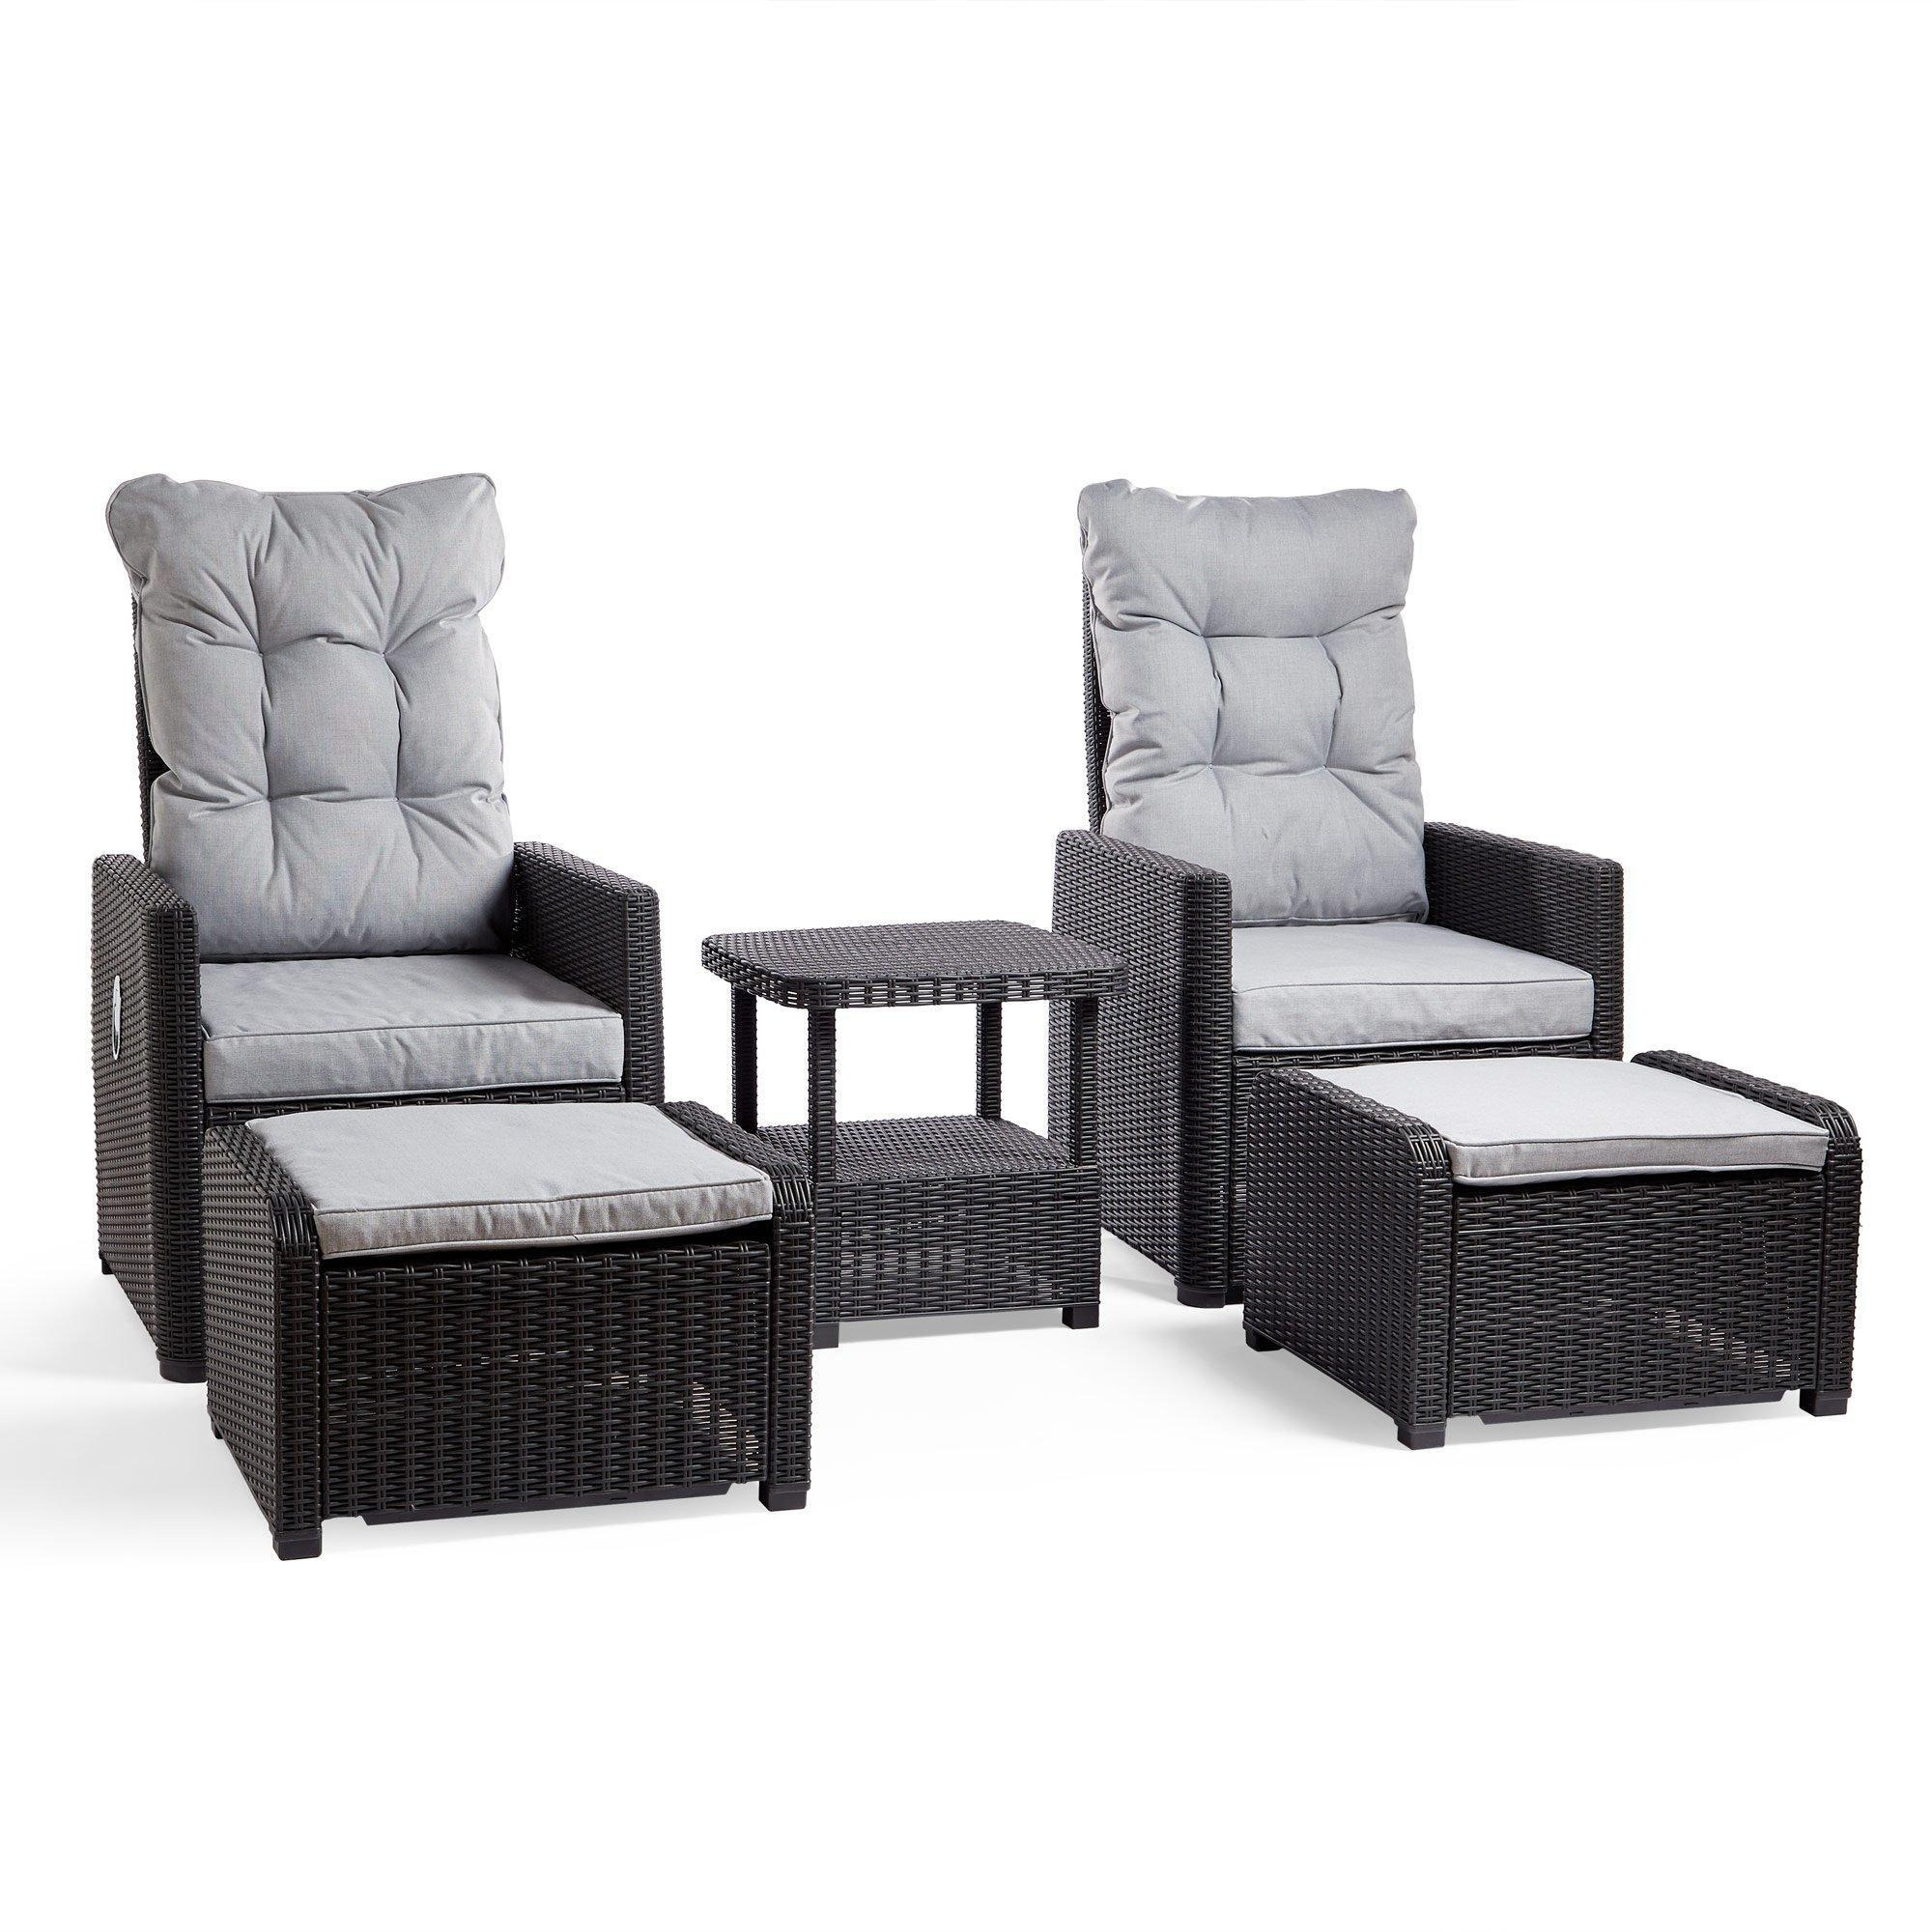 2 Seater Garden and Patio Reclining Rattan Bistro Set - image 1